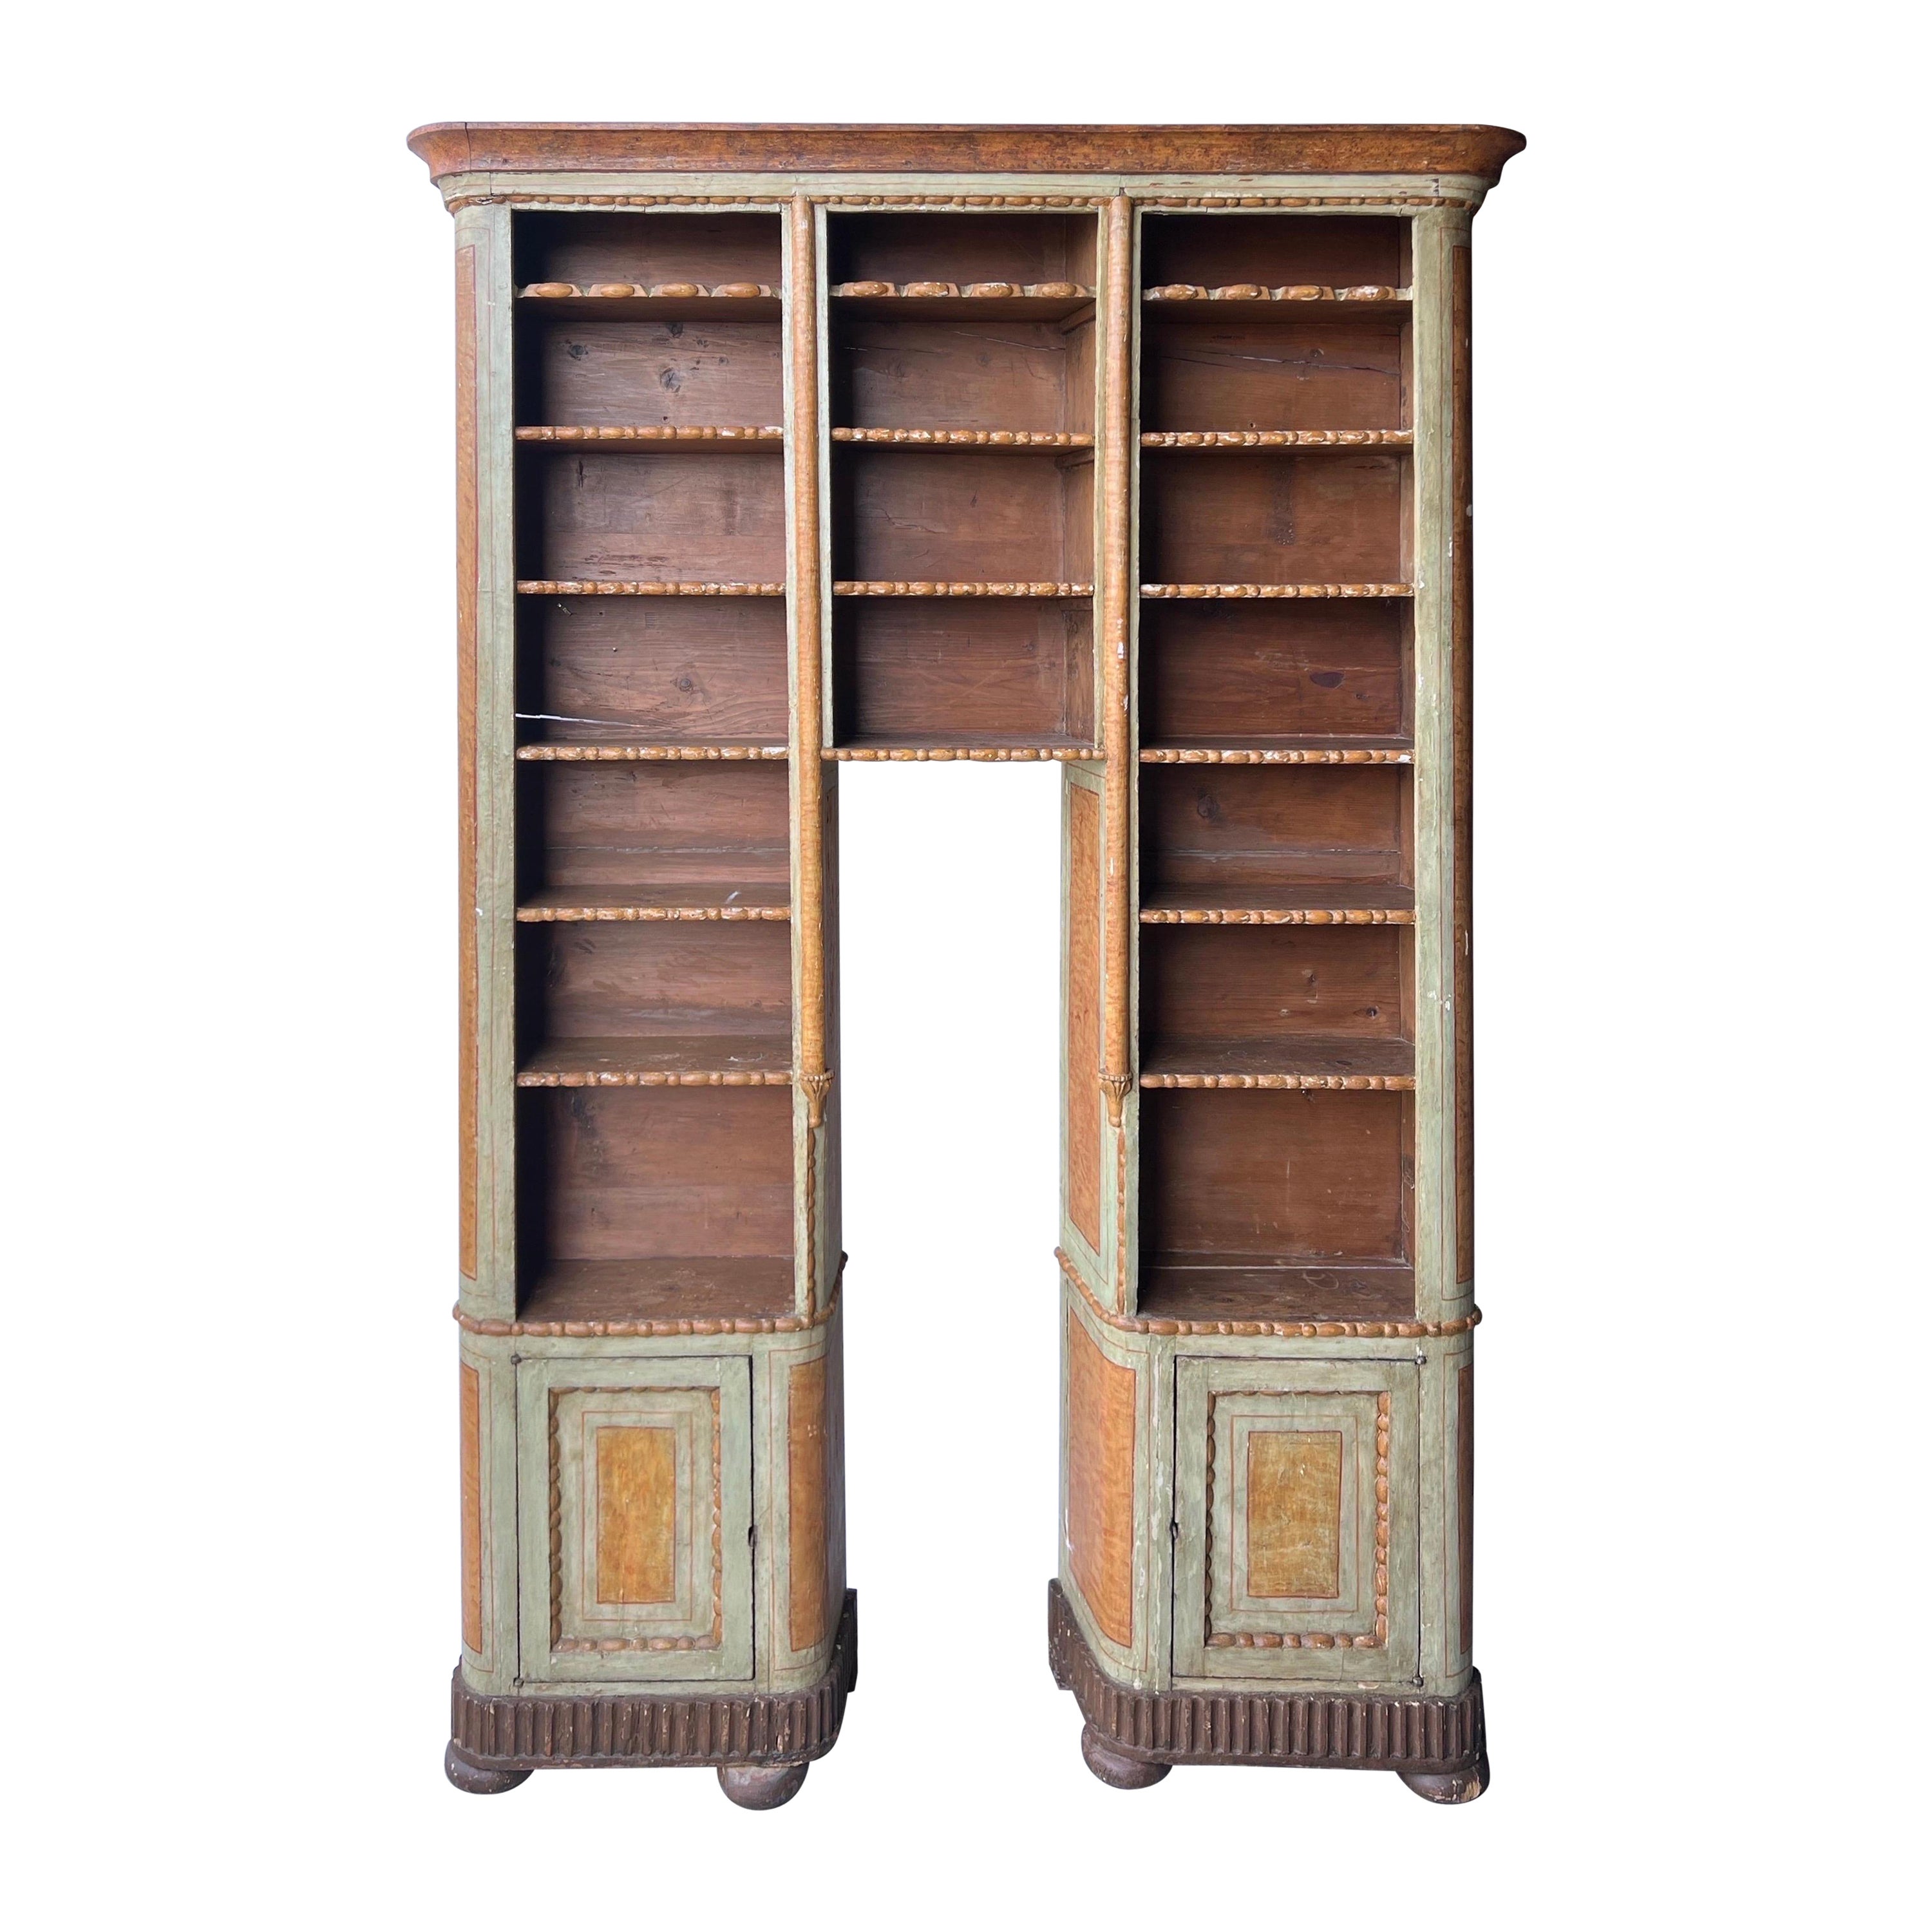 Early 18th century Italian or Gustavian paint decorated bookcase 